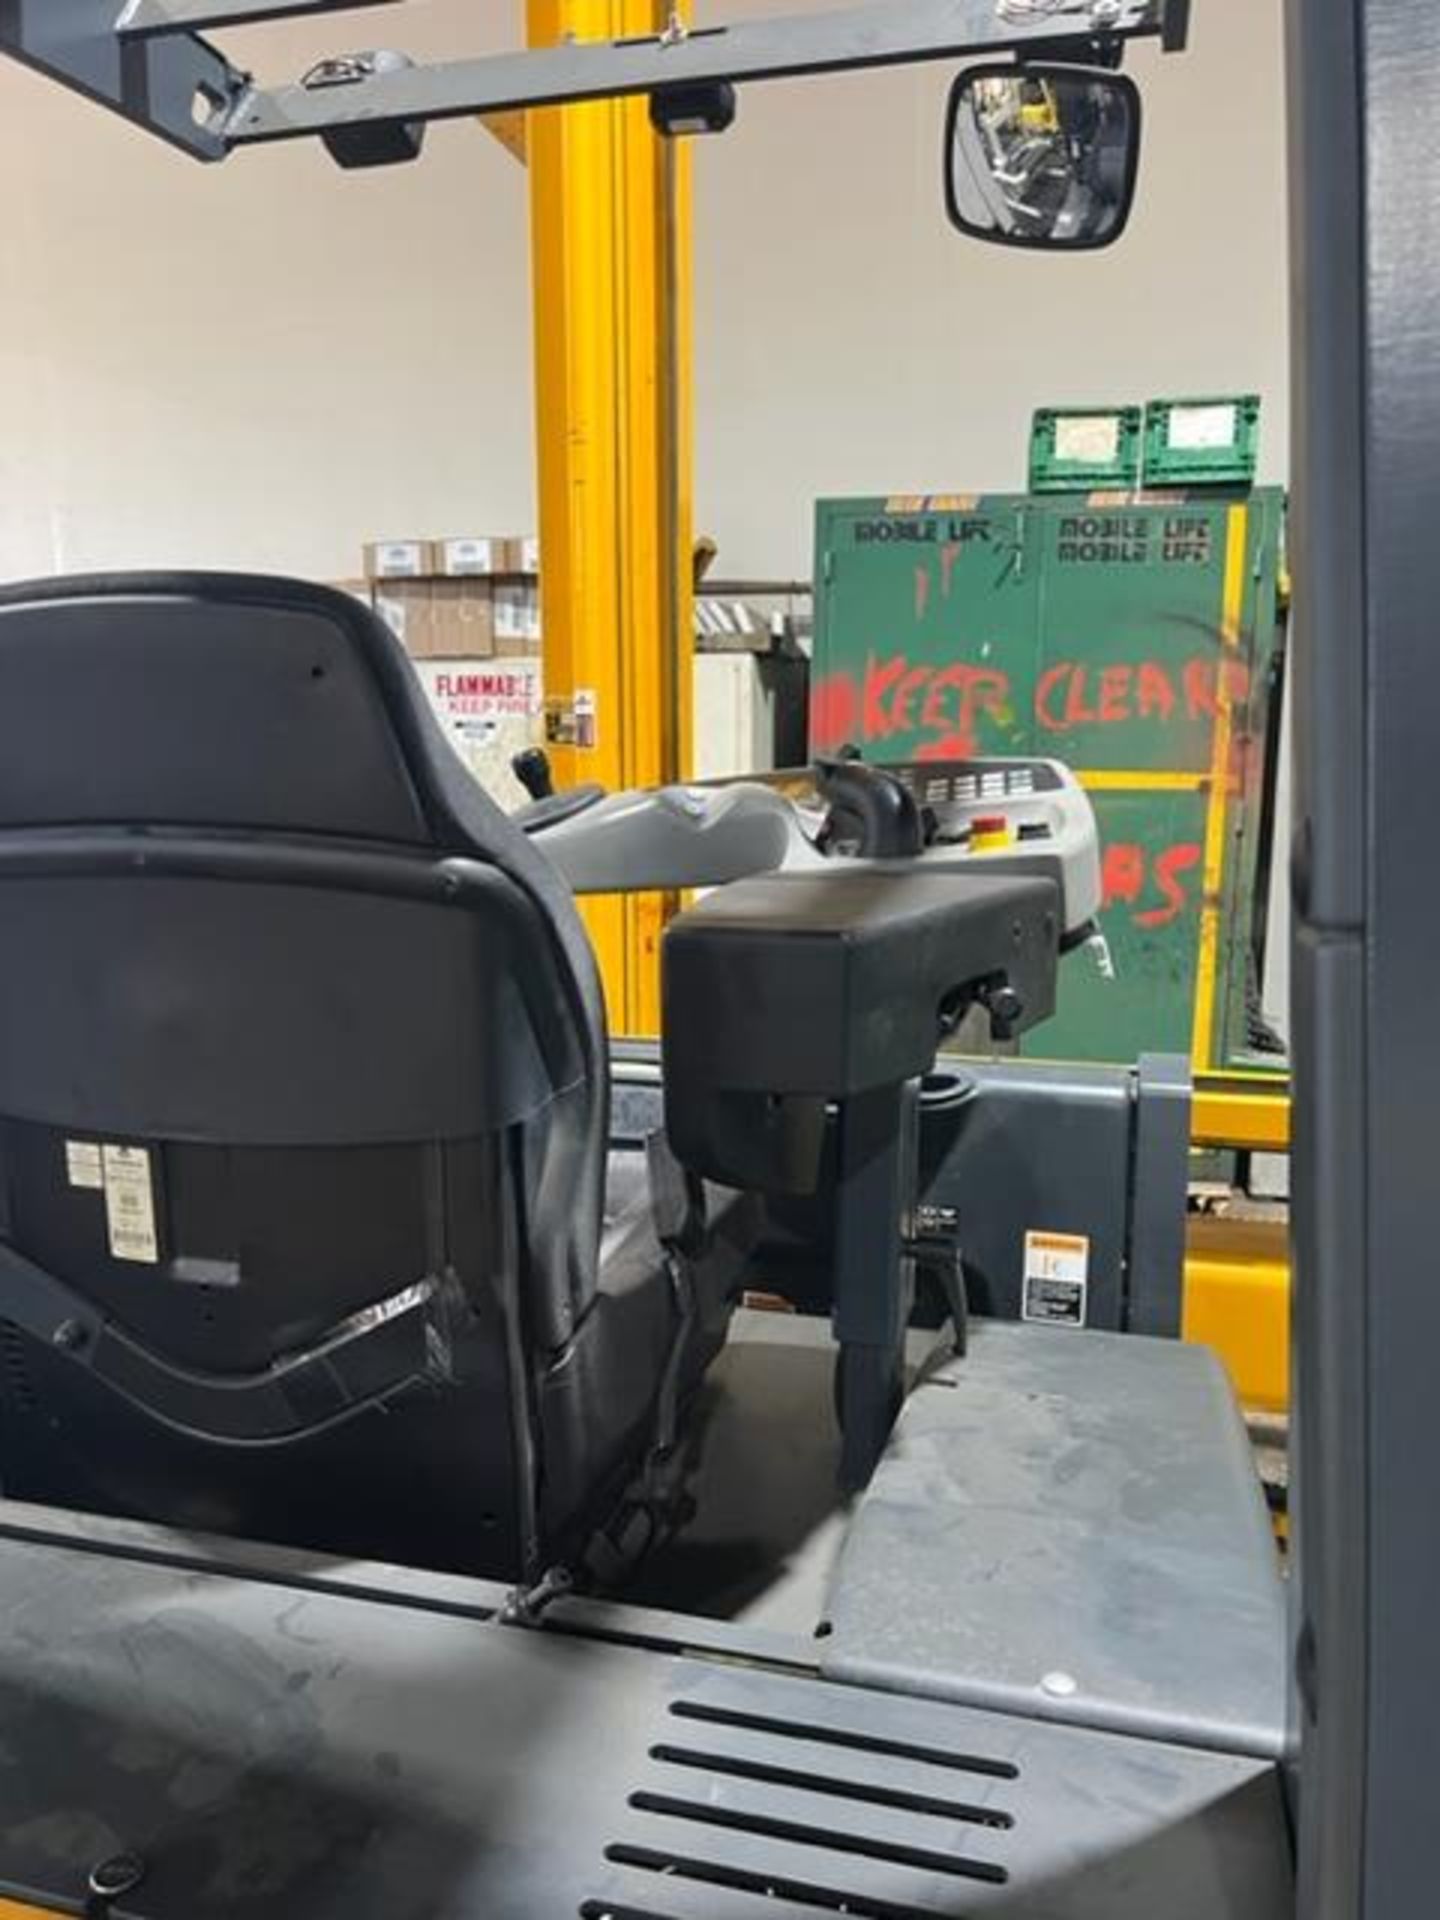 ***Clean Jungheinrich EFX410 Side-Loader Narrow Aisle Forklift Unit Electric - Electrical Issues - Image 6 of 6